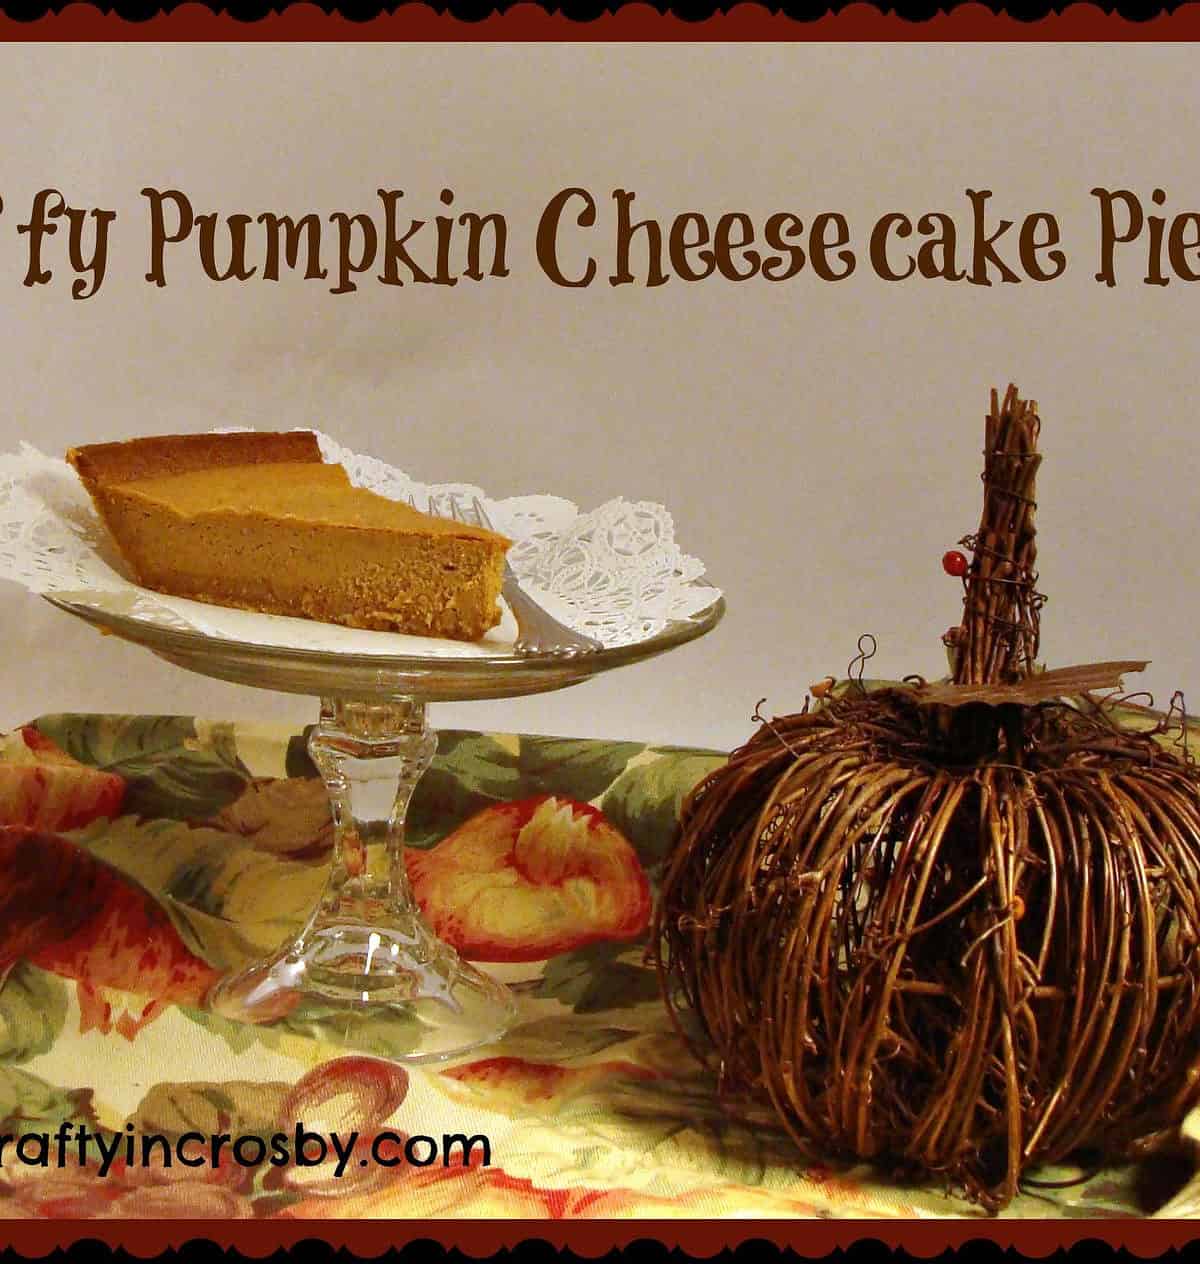  A divine balance between the creamy cheesecake layer and the pumpkin-spiced filling.